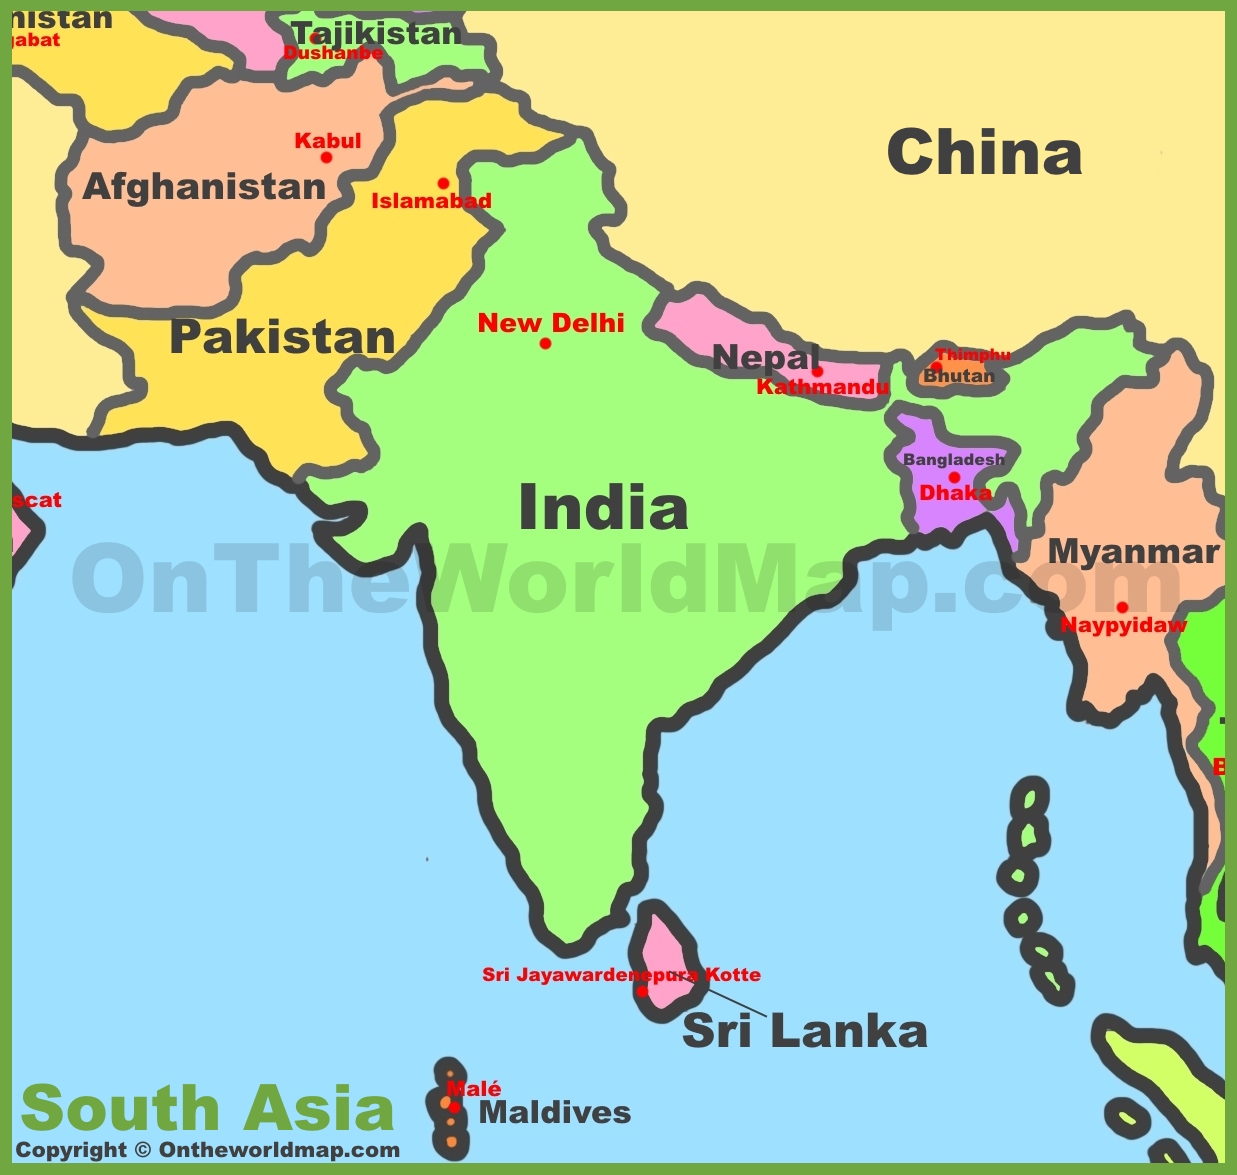 Map of South Asia (Southern Asia)